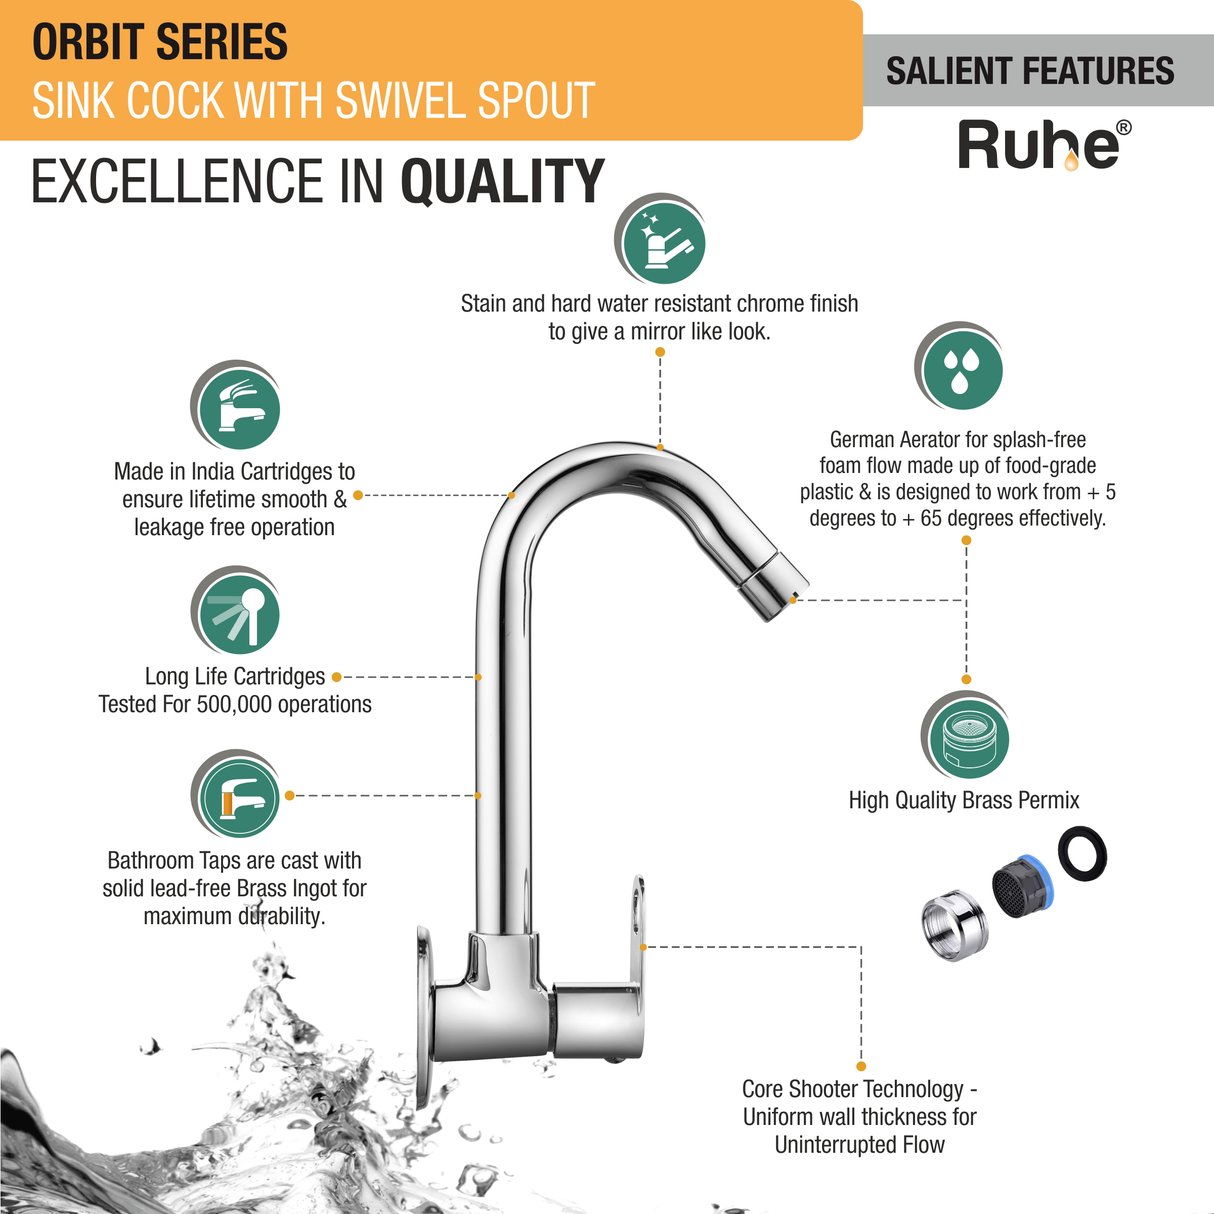 Orbit Sink Tap with Small (12 inches) Round Swivel Spout Brass Faucet features